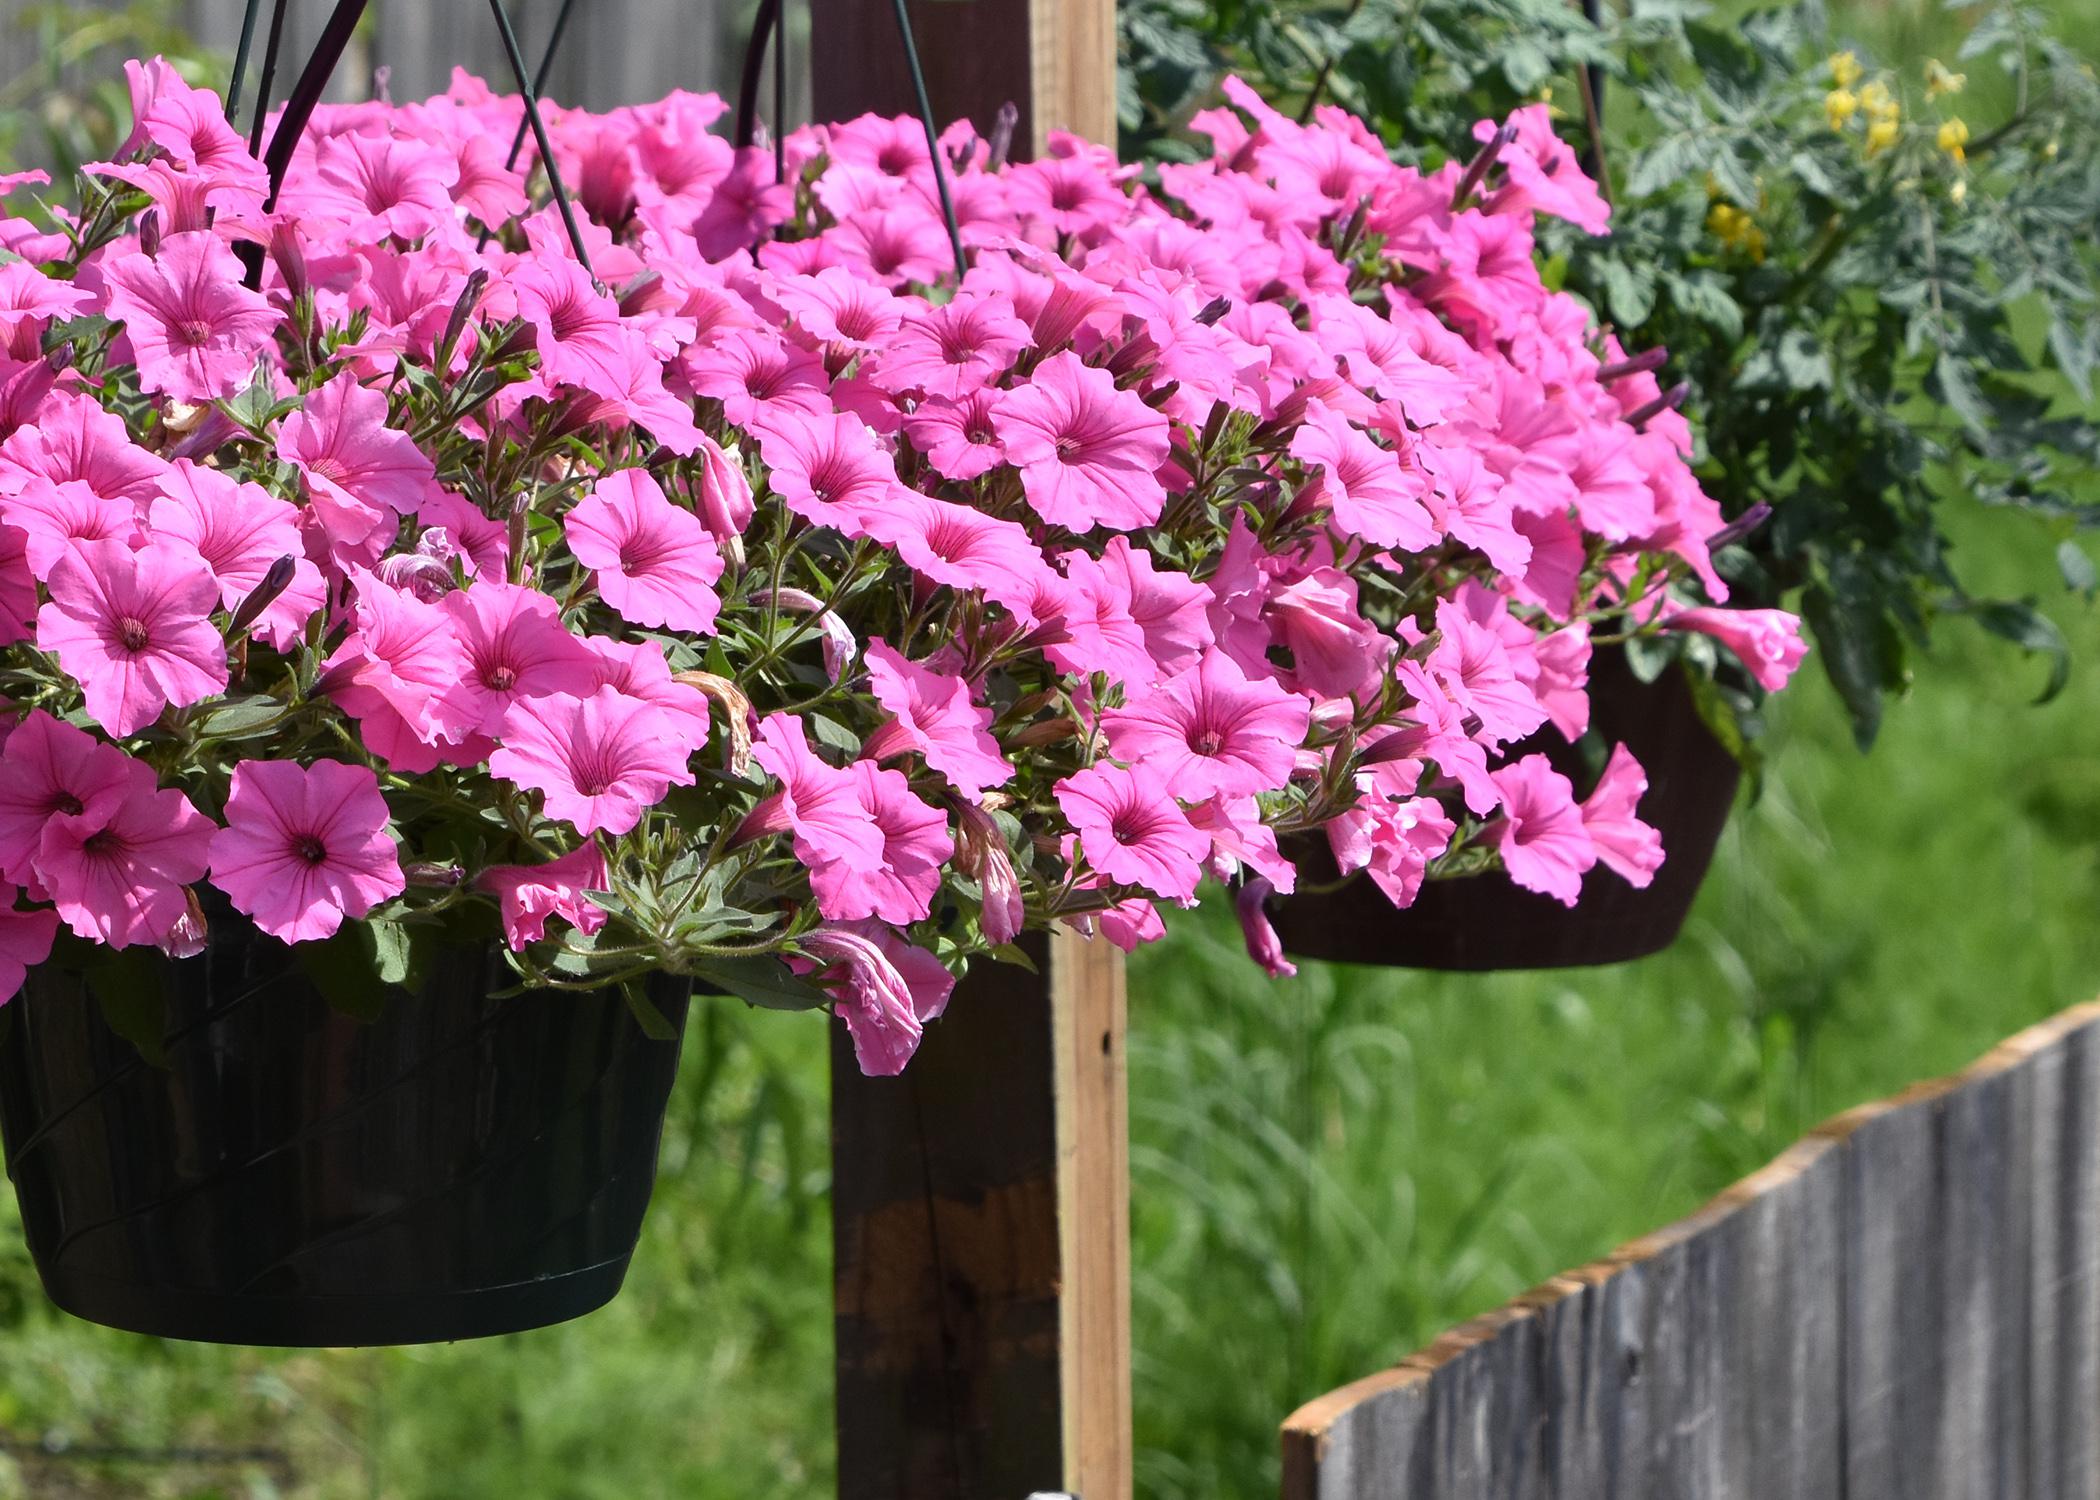 A hanging basket is filled with pink blooms.